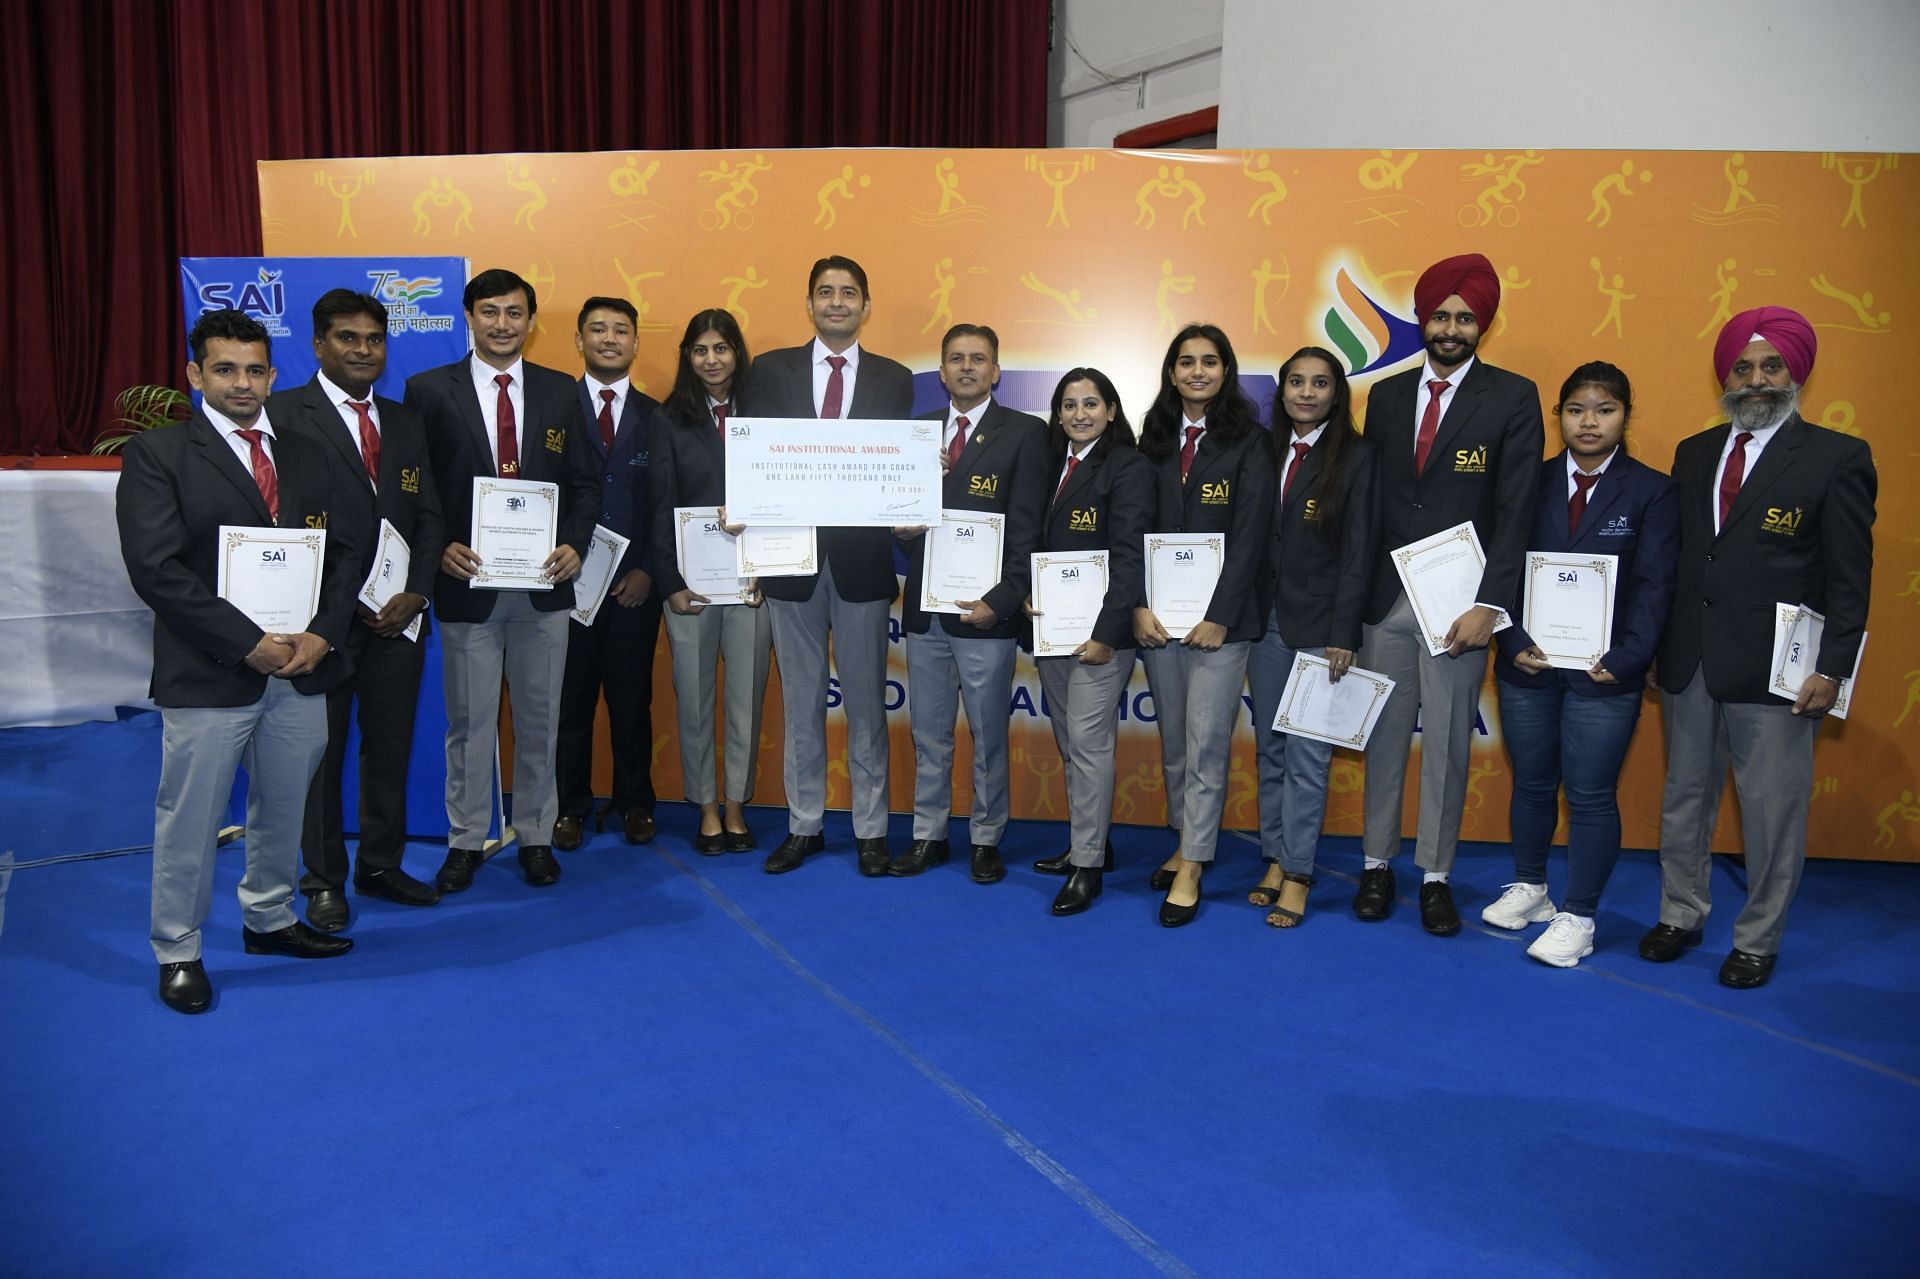 A section of winners at the SAI Institutional Awards. (PC: SAI)